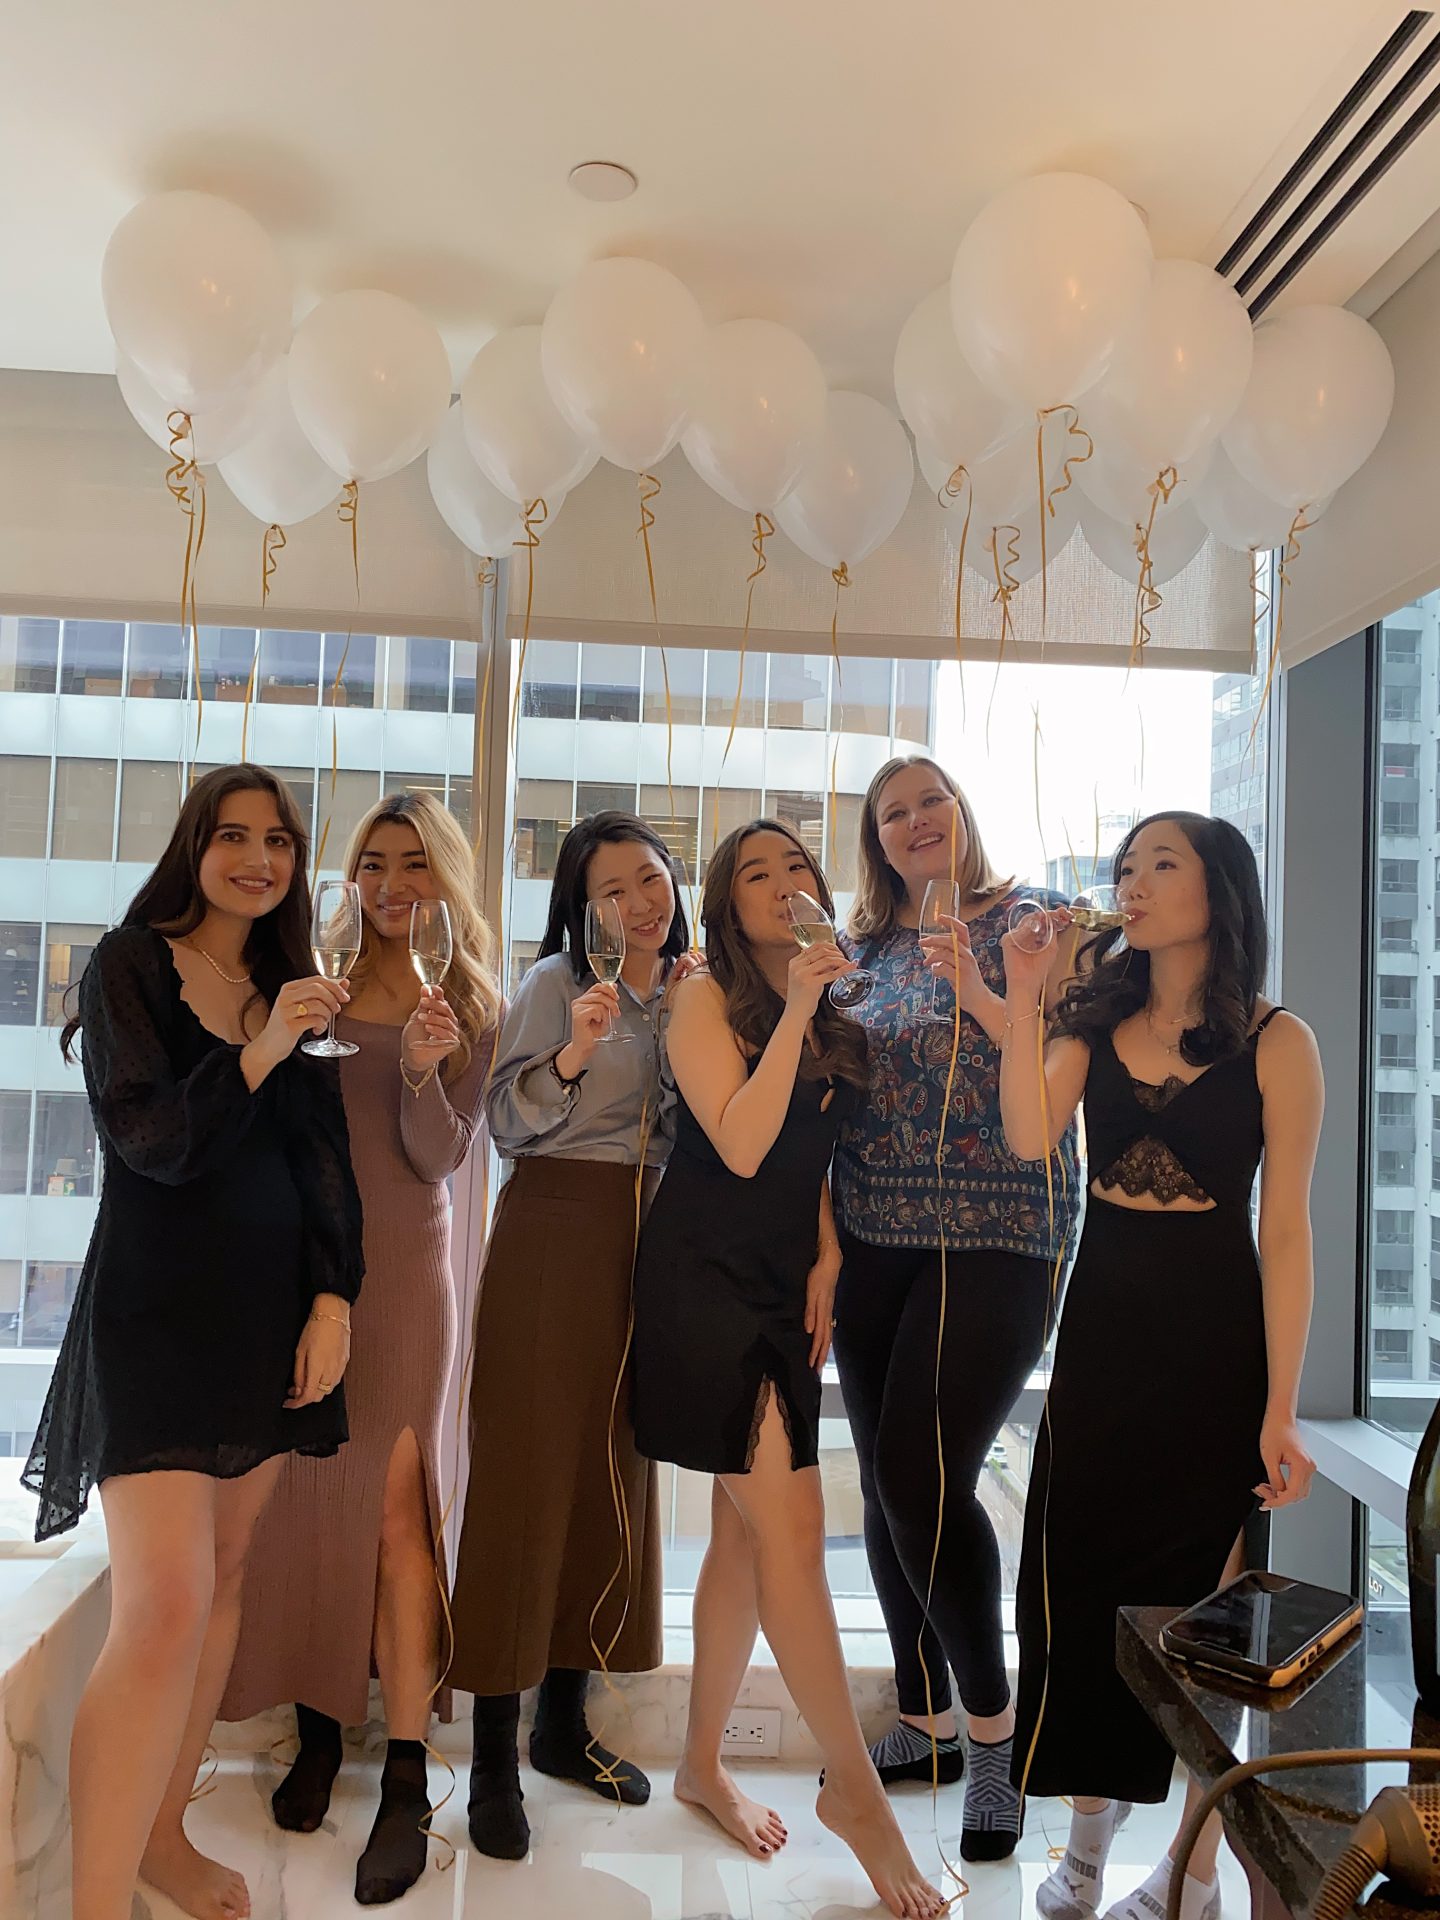 my 5 bridesmaids and I saying cheers to a good night